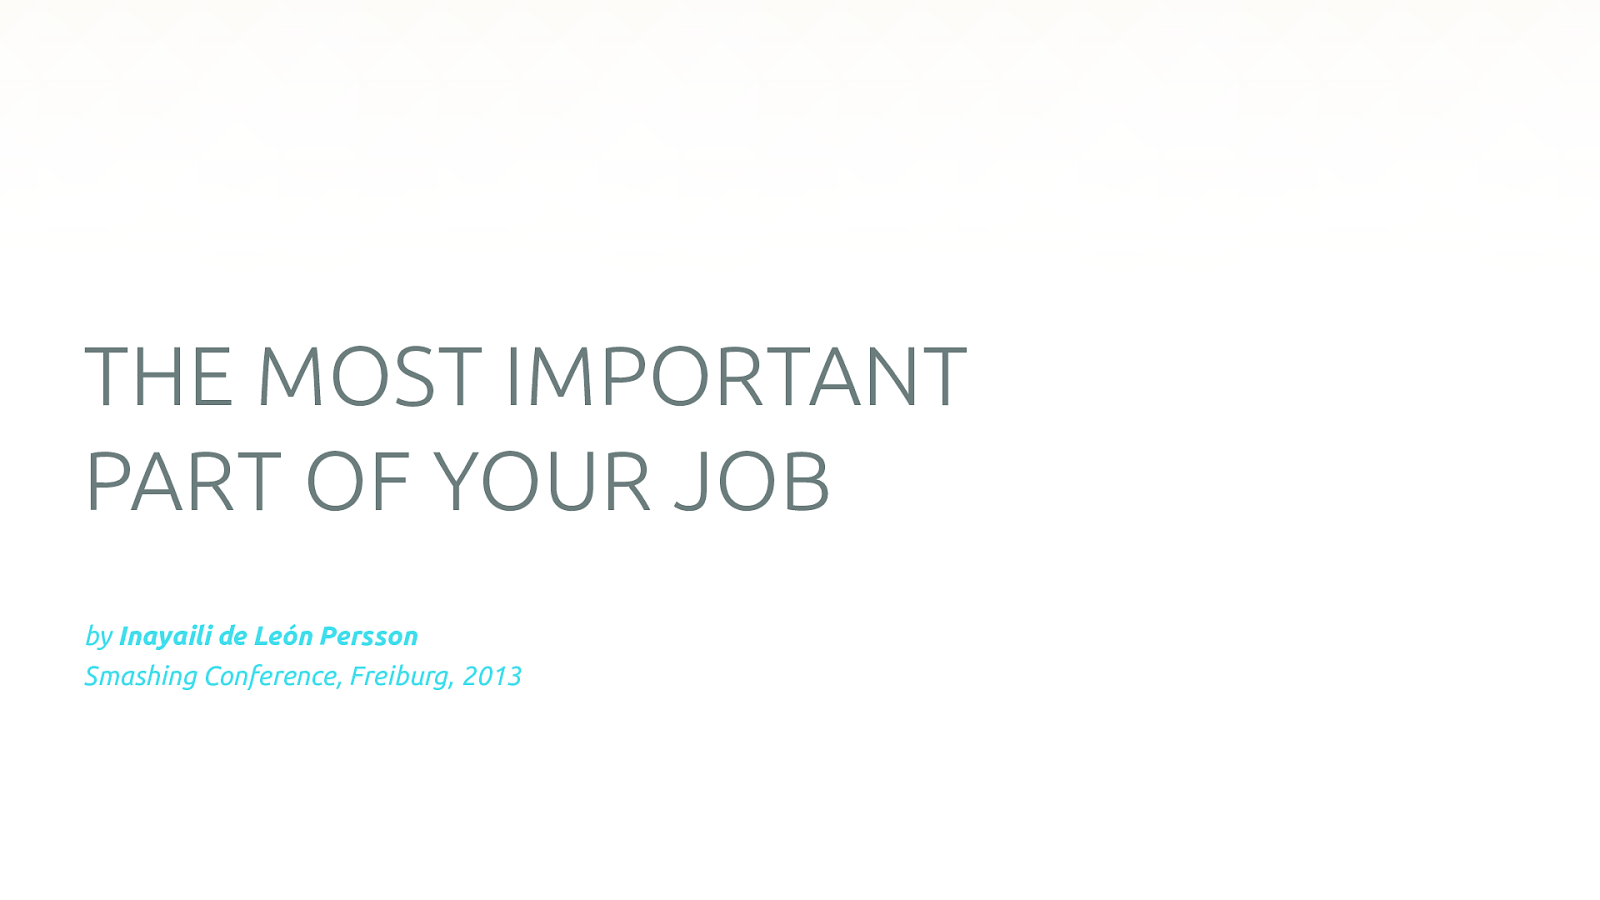 The most important part of your job